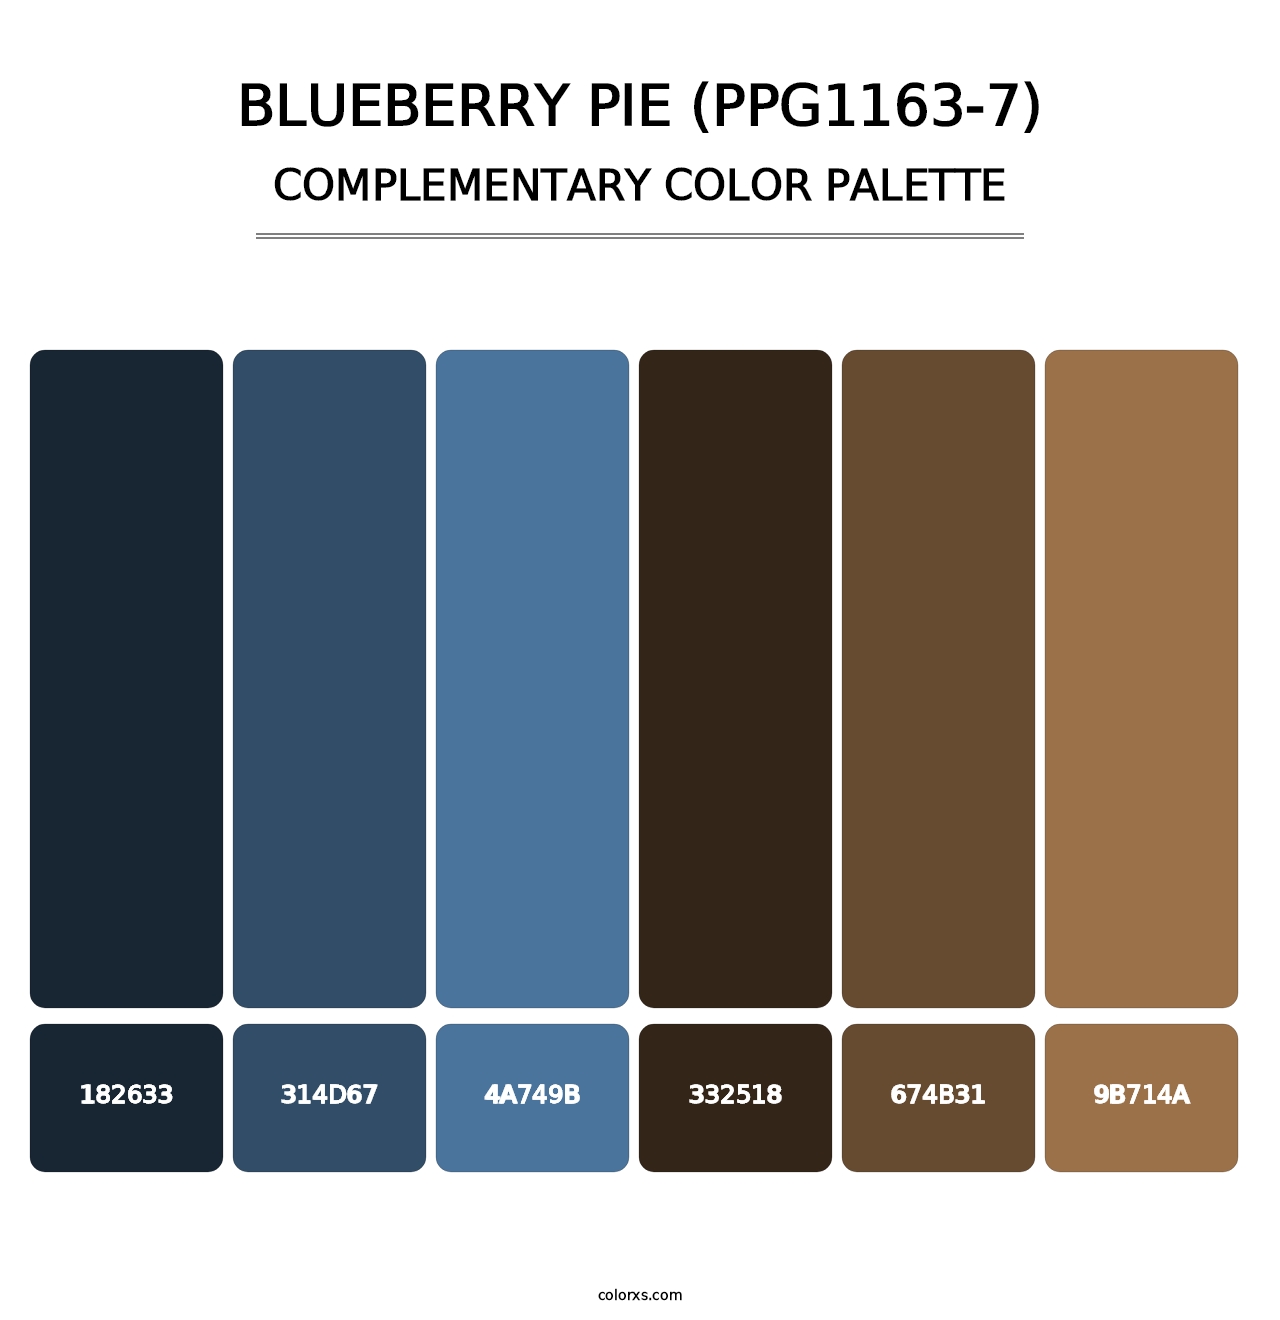 Blueberry Pie (PPG1163-7) - Complementary Color Palette